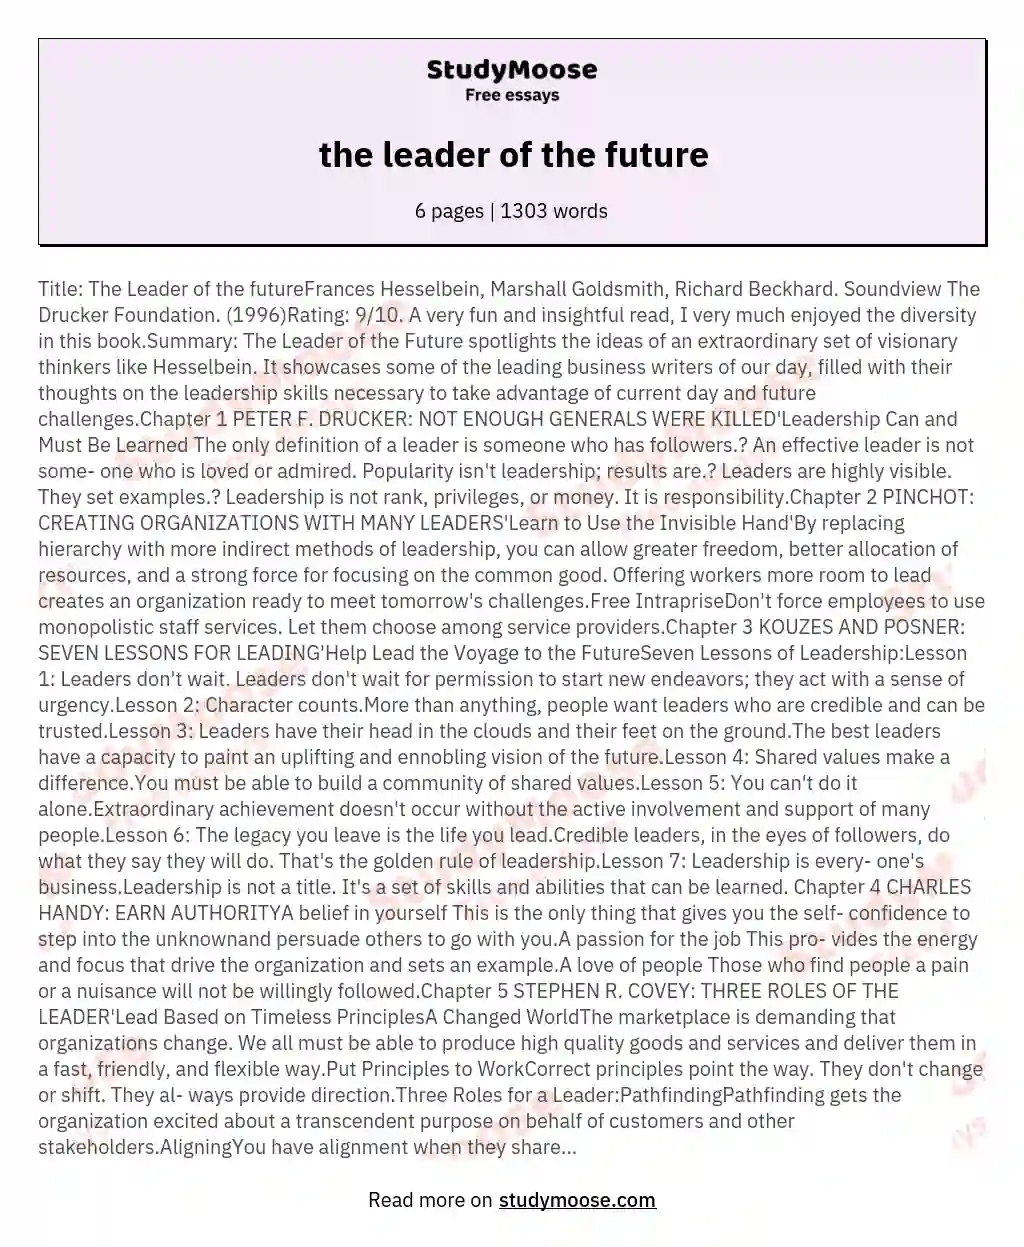 the leader of the future essay